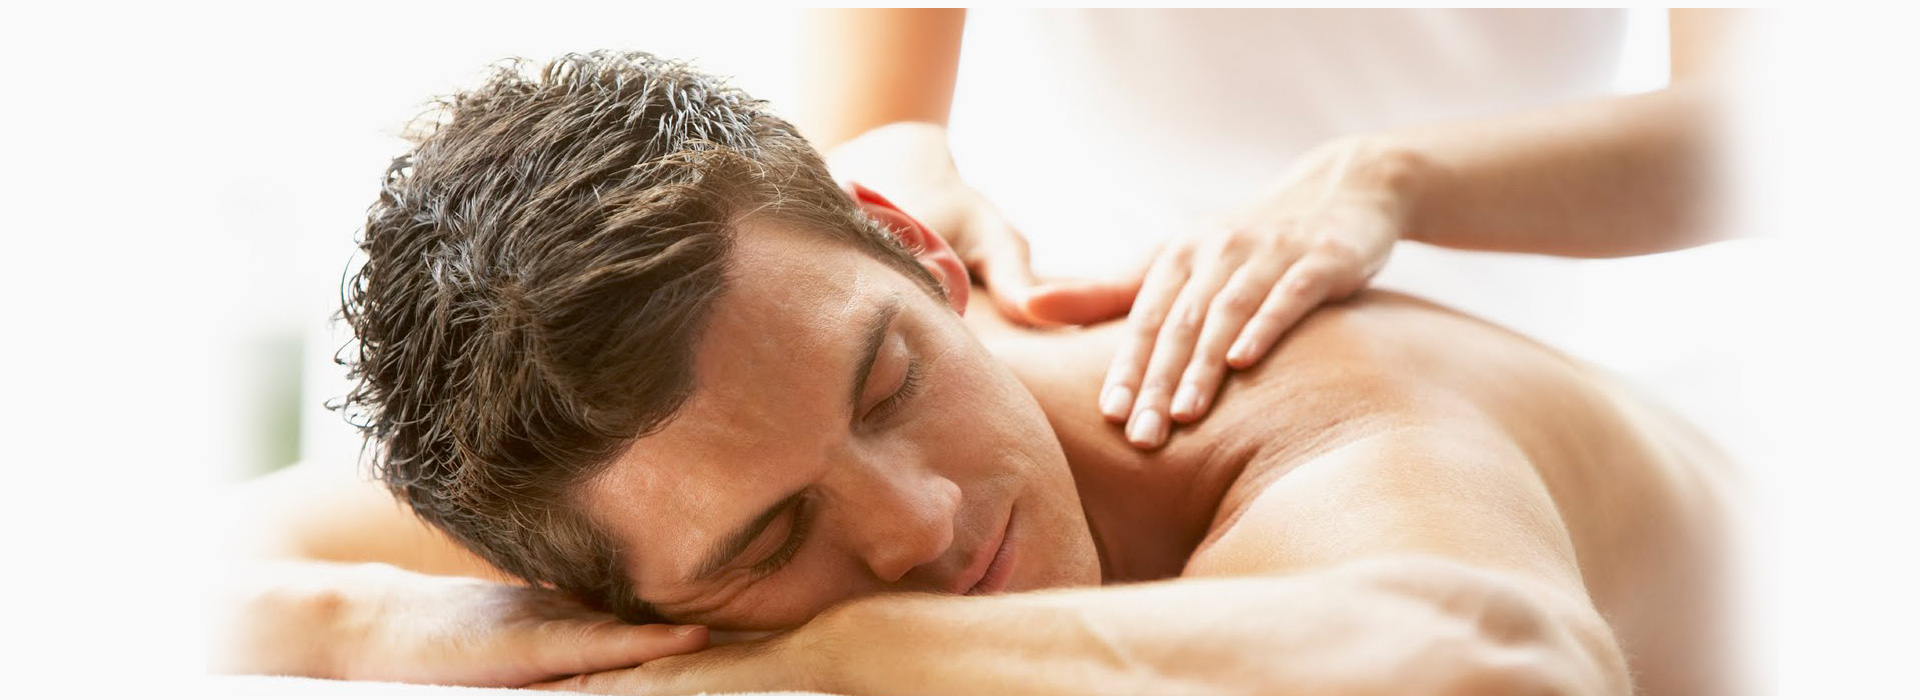 Tantric Massage different from Erotic Massage, differences between tantric and erotic massage,